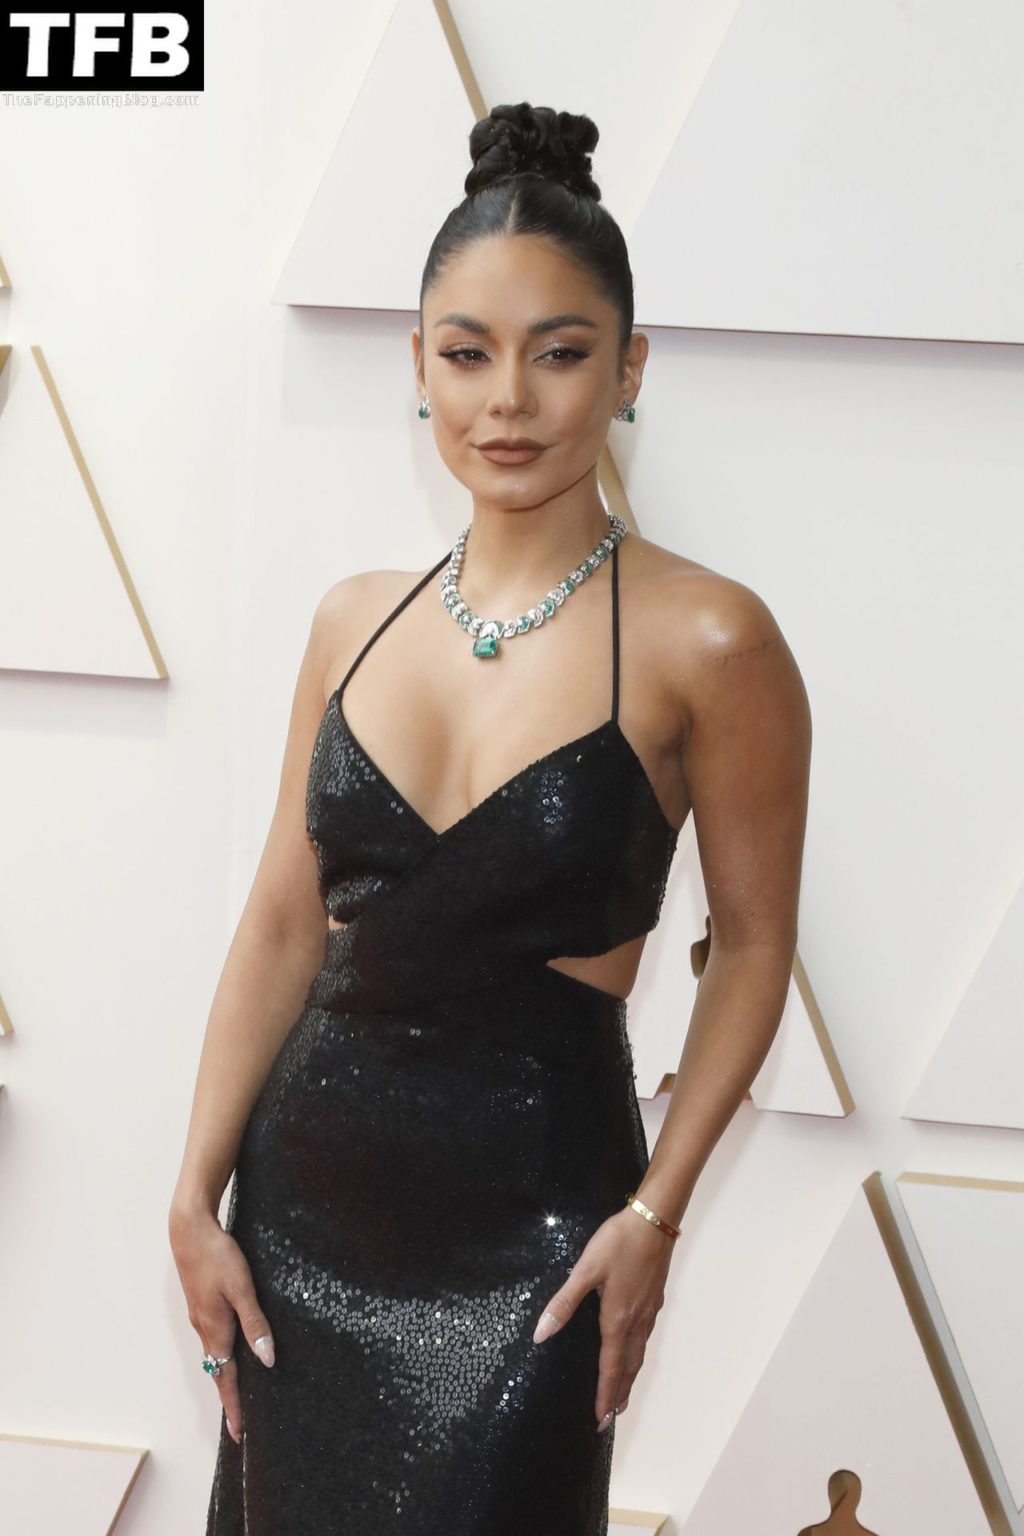 Vanessa Hudgens Sexy The Fappening Blog 71 2 1024x1536 - Vanessa Hudgens Poses on the Red Carpet at the 94th Annual Academy Awards (83 Photos)